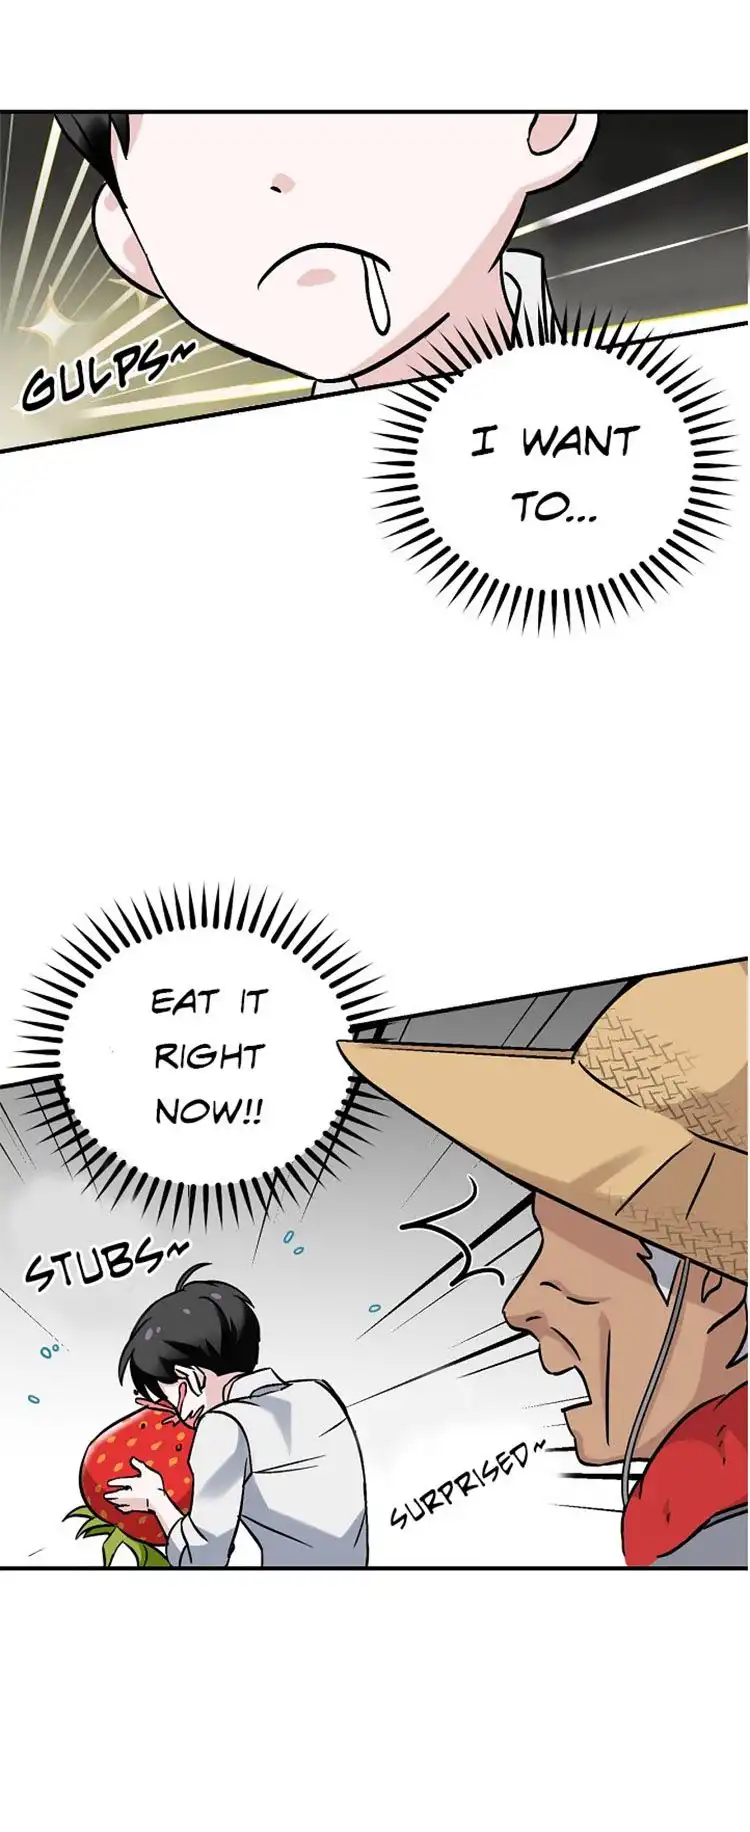 Leveling Up, By Only Eating! Chapter 23